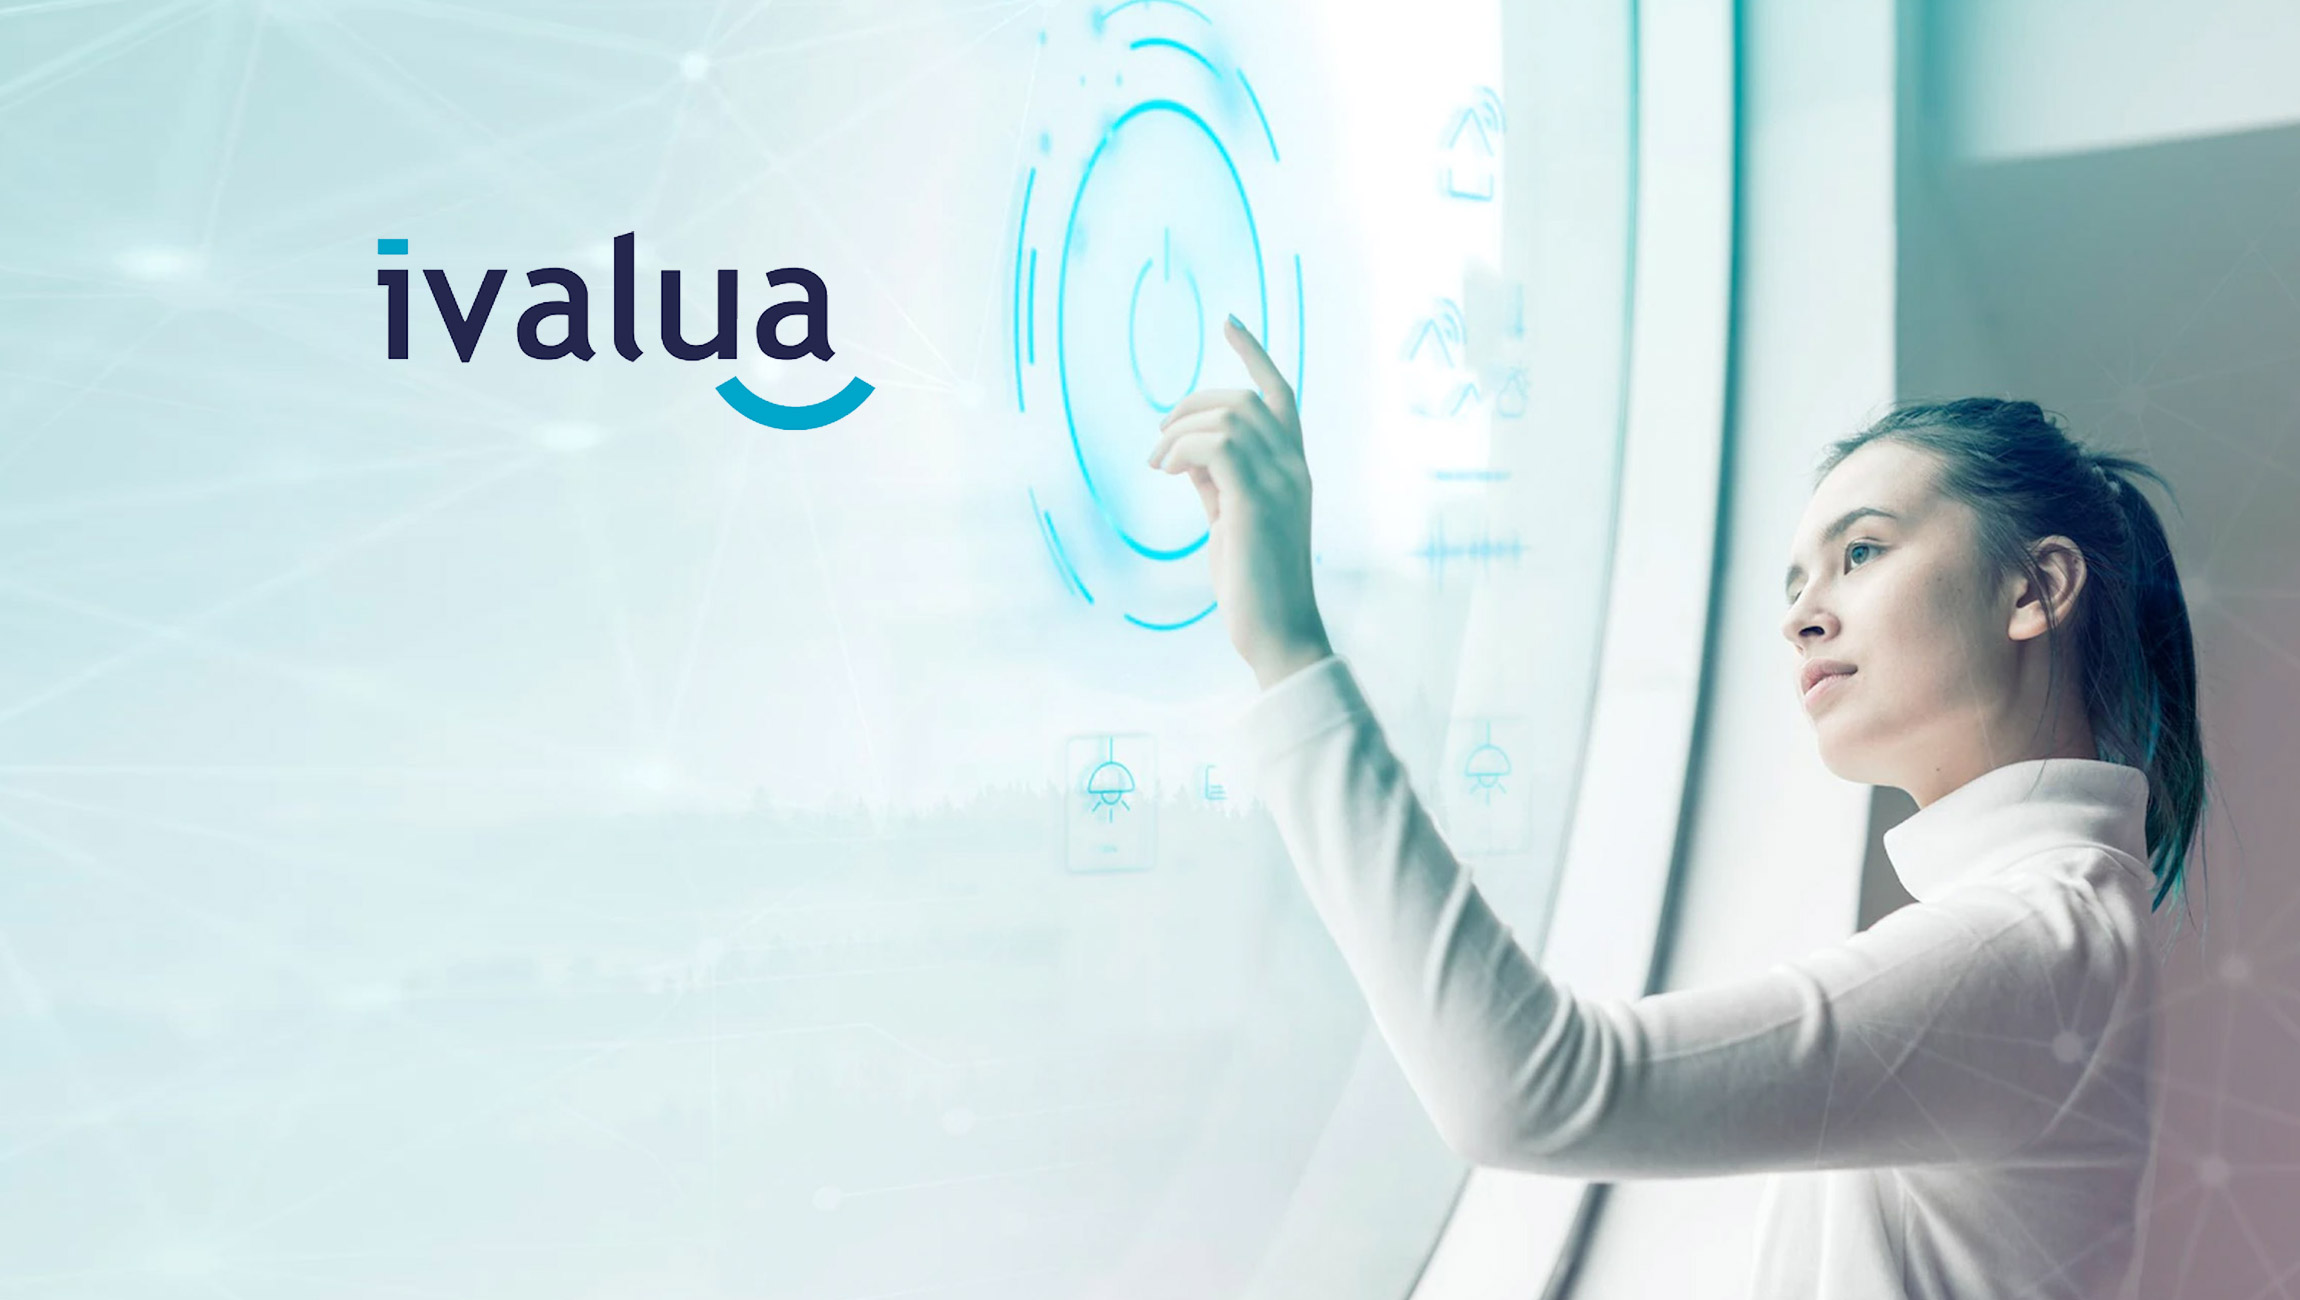 Ivalua Named a Leader in the Gartner Magic Quadrant for Procure-to-Pay Suites for 4th Consecutive Year